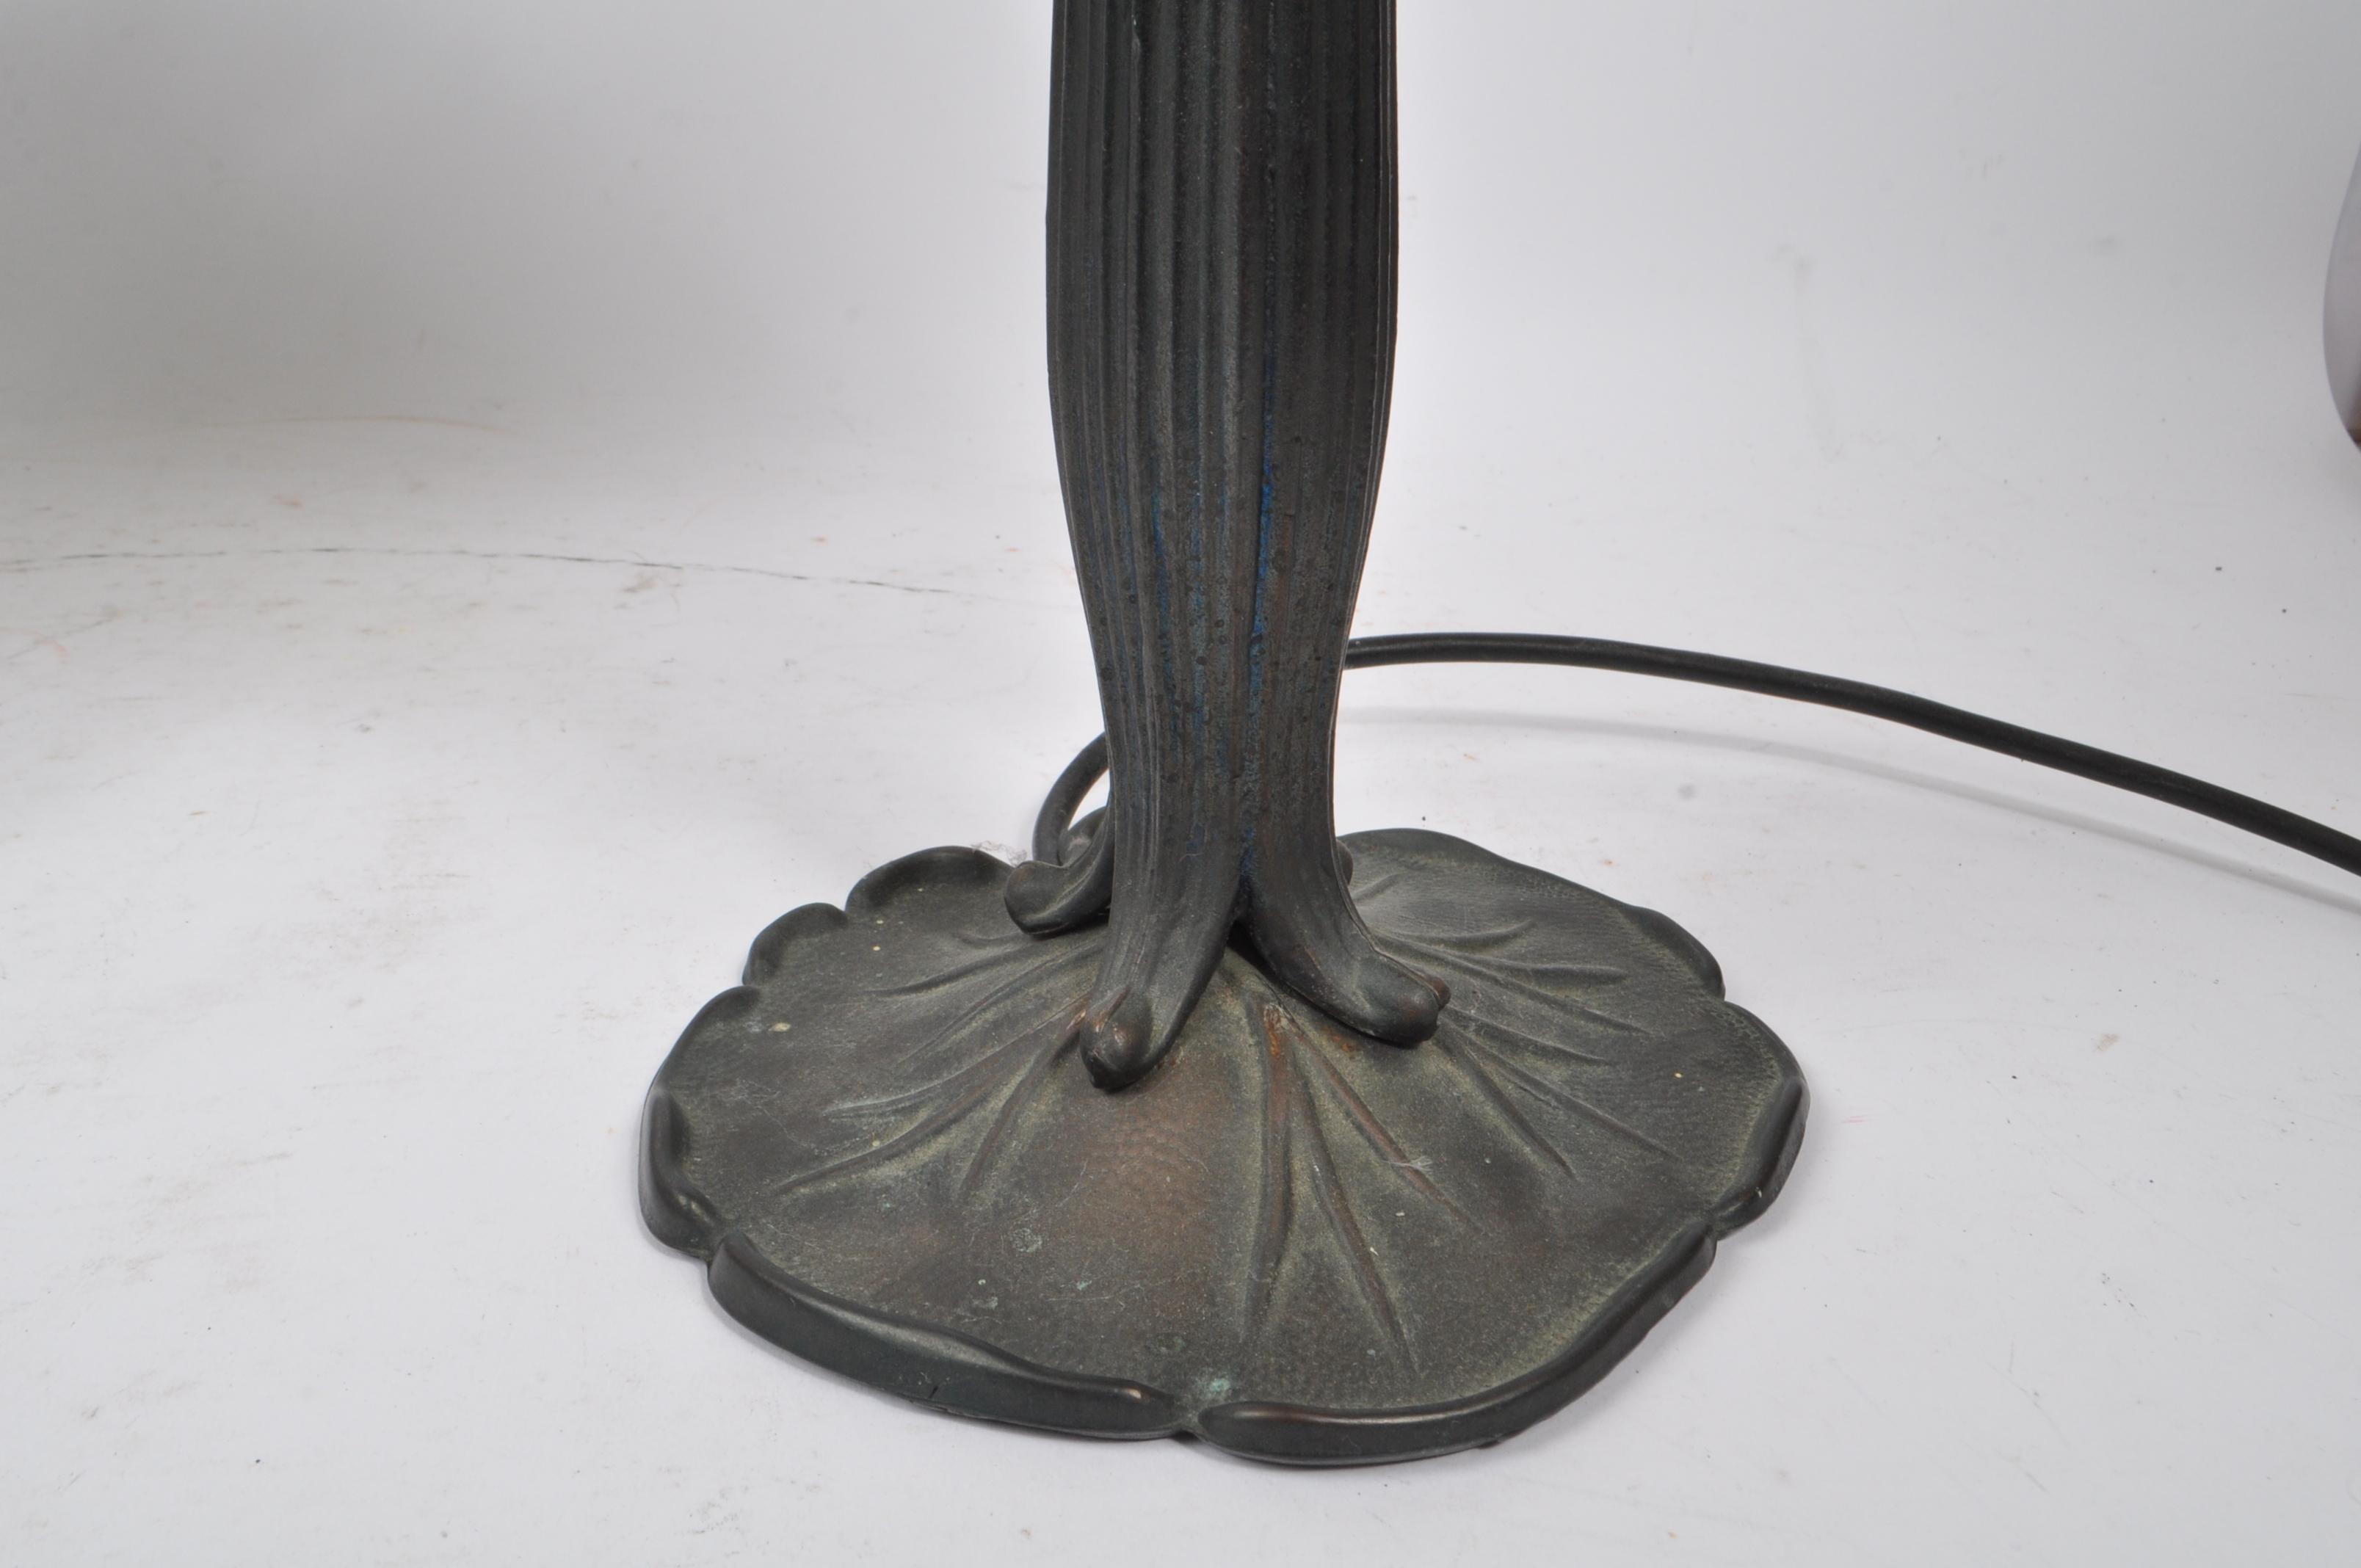 TWO 20TH CENTURY TIFFANY SIDE TABLE LAMPS - Image 5 of 6